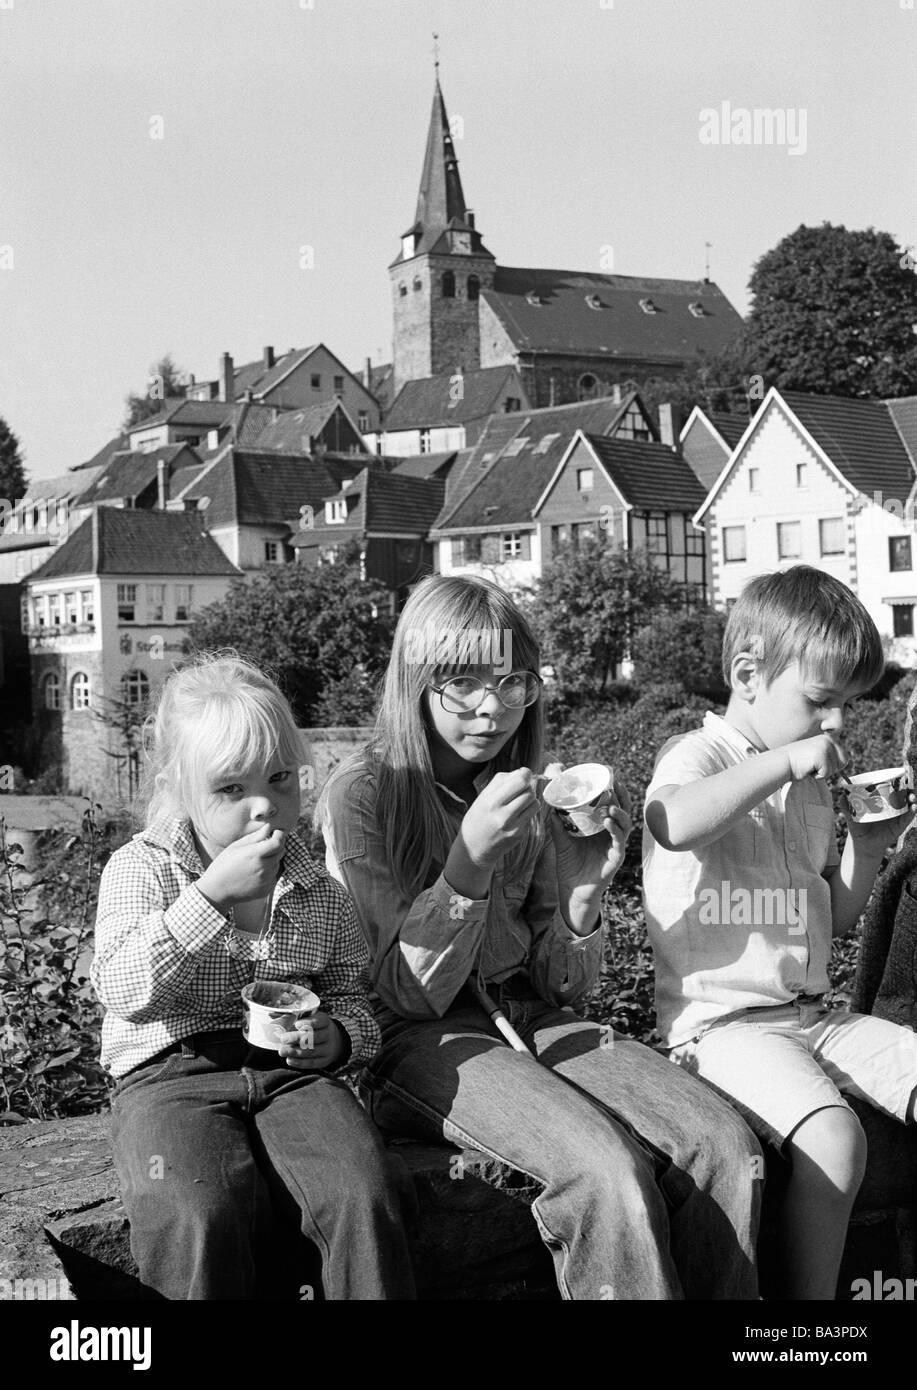 Seventies, black and white photo, people, children, two girls an a boy sit on a wall nibbling ice cream, aged 4 to 12 years, in the background the old town of Kettwig, evangelic market church, residential buildings, D-Essen, D-Essen-Kettwig, Ruhr area, North Rhine-Westphalia Stock Photo